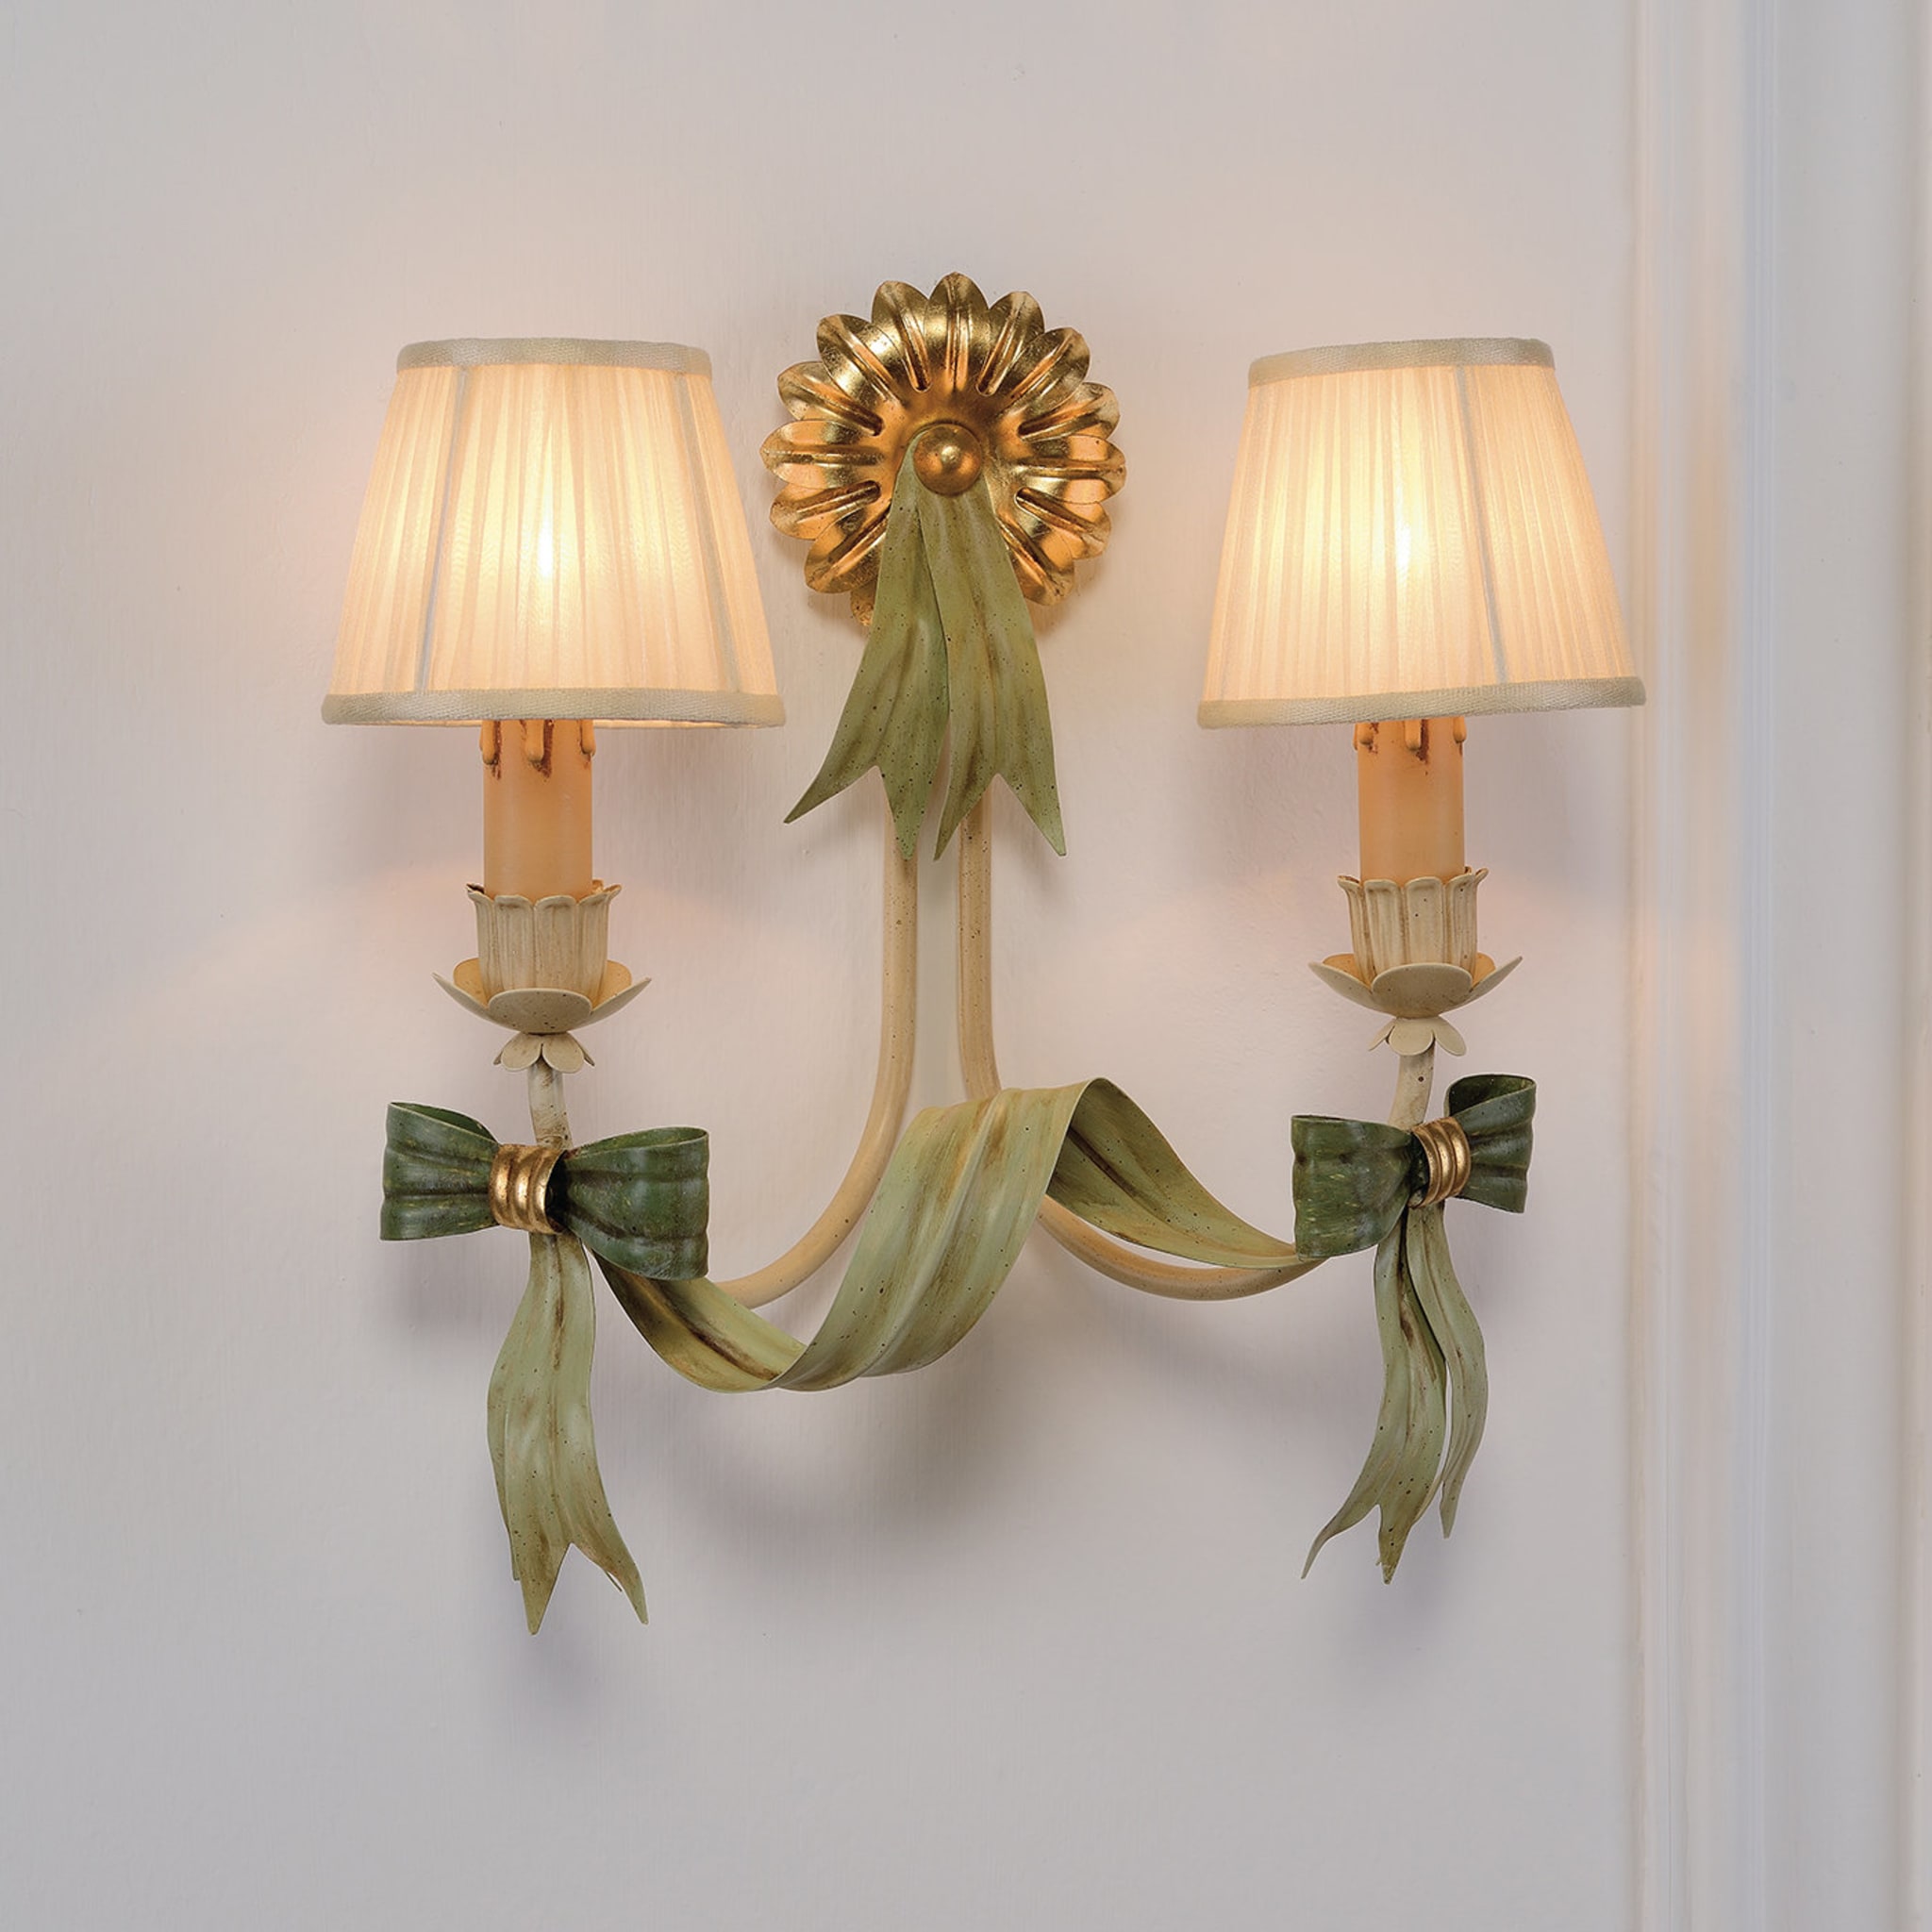 1365 Double Green Bow Metal Sconce Light Fixture - Alternative view 1